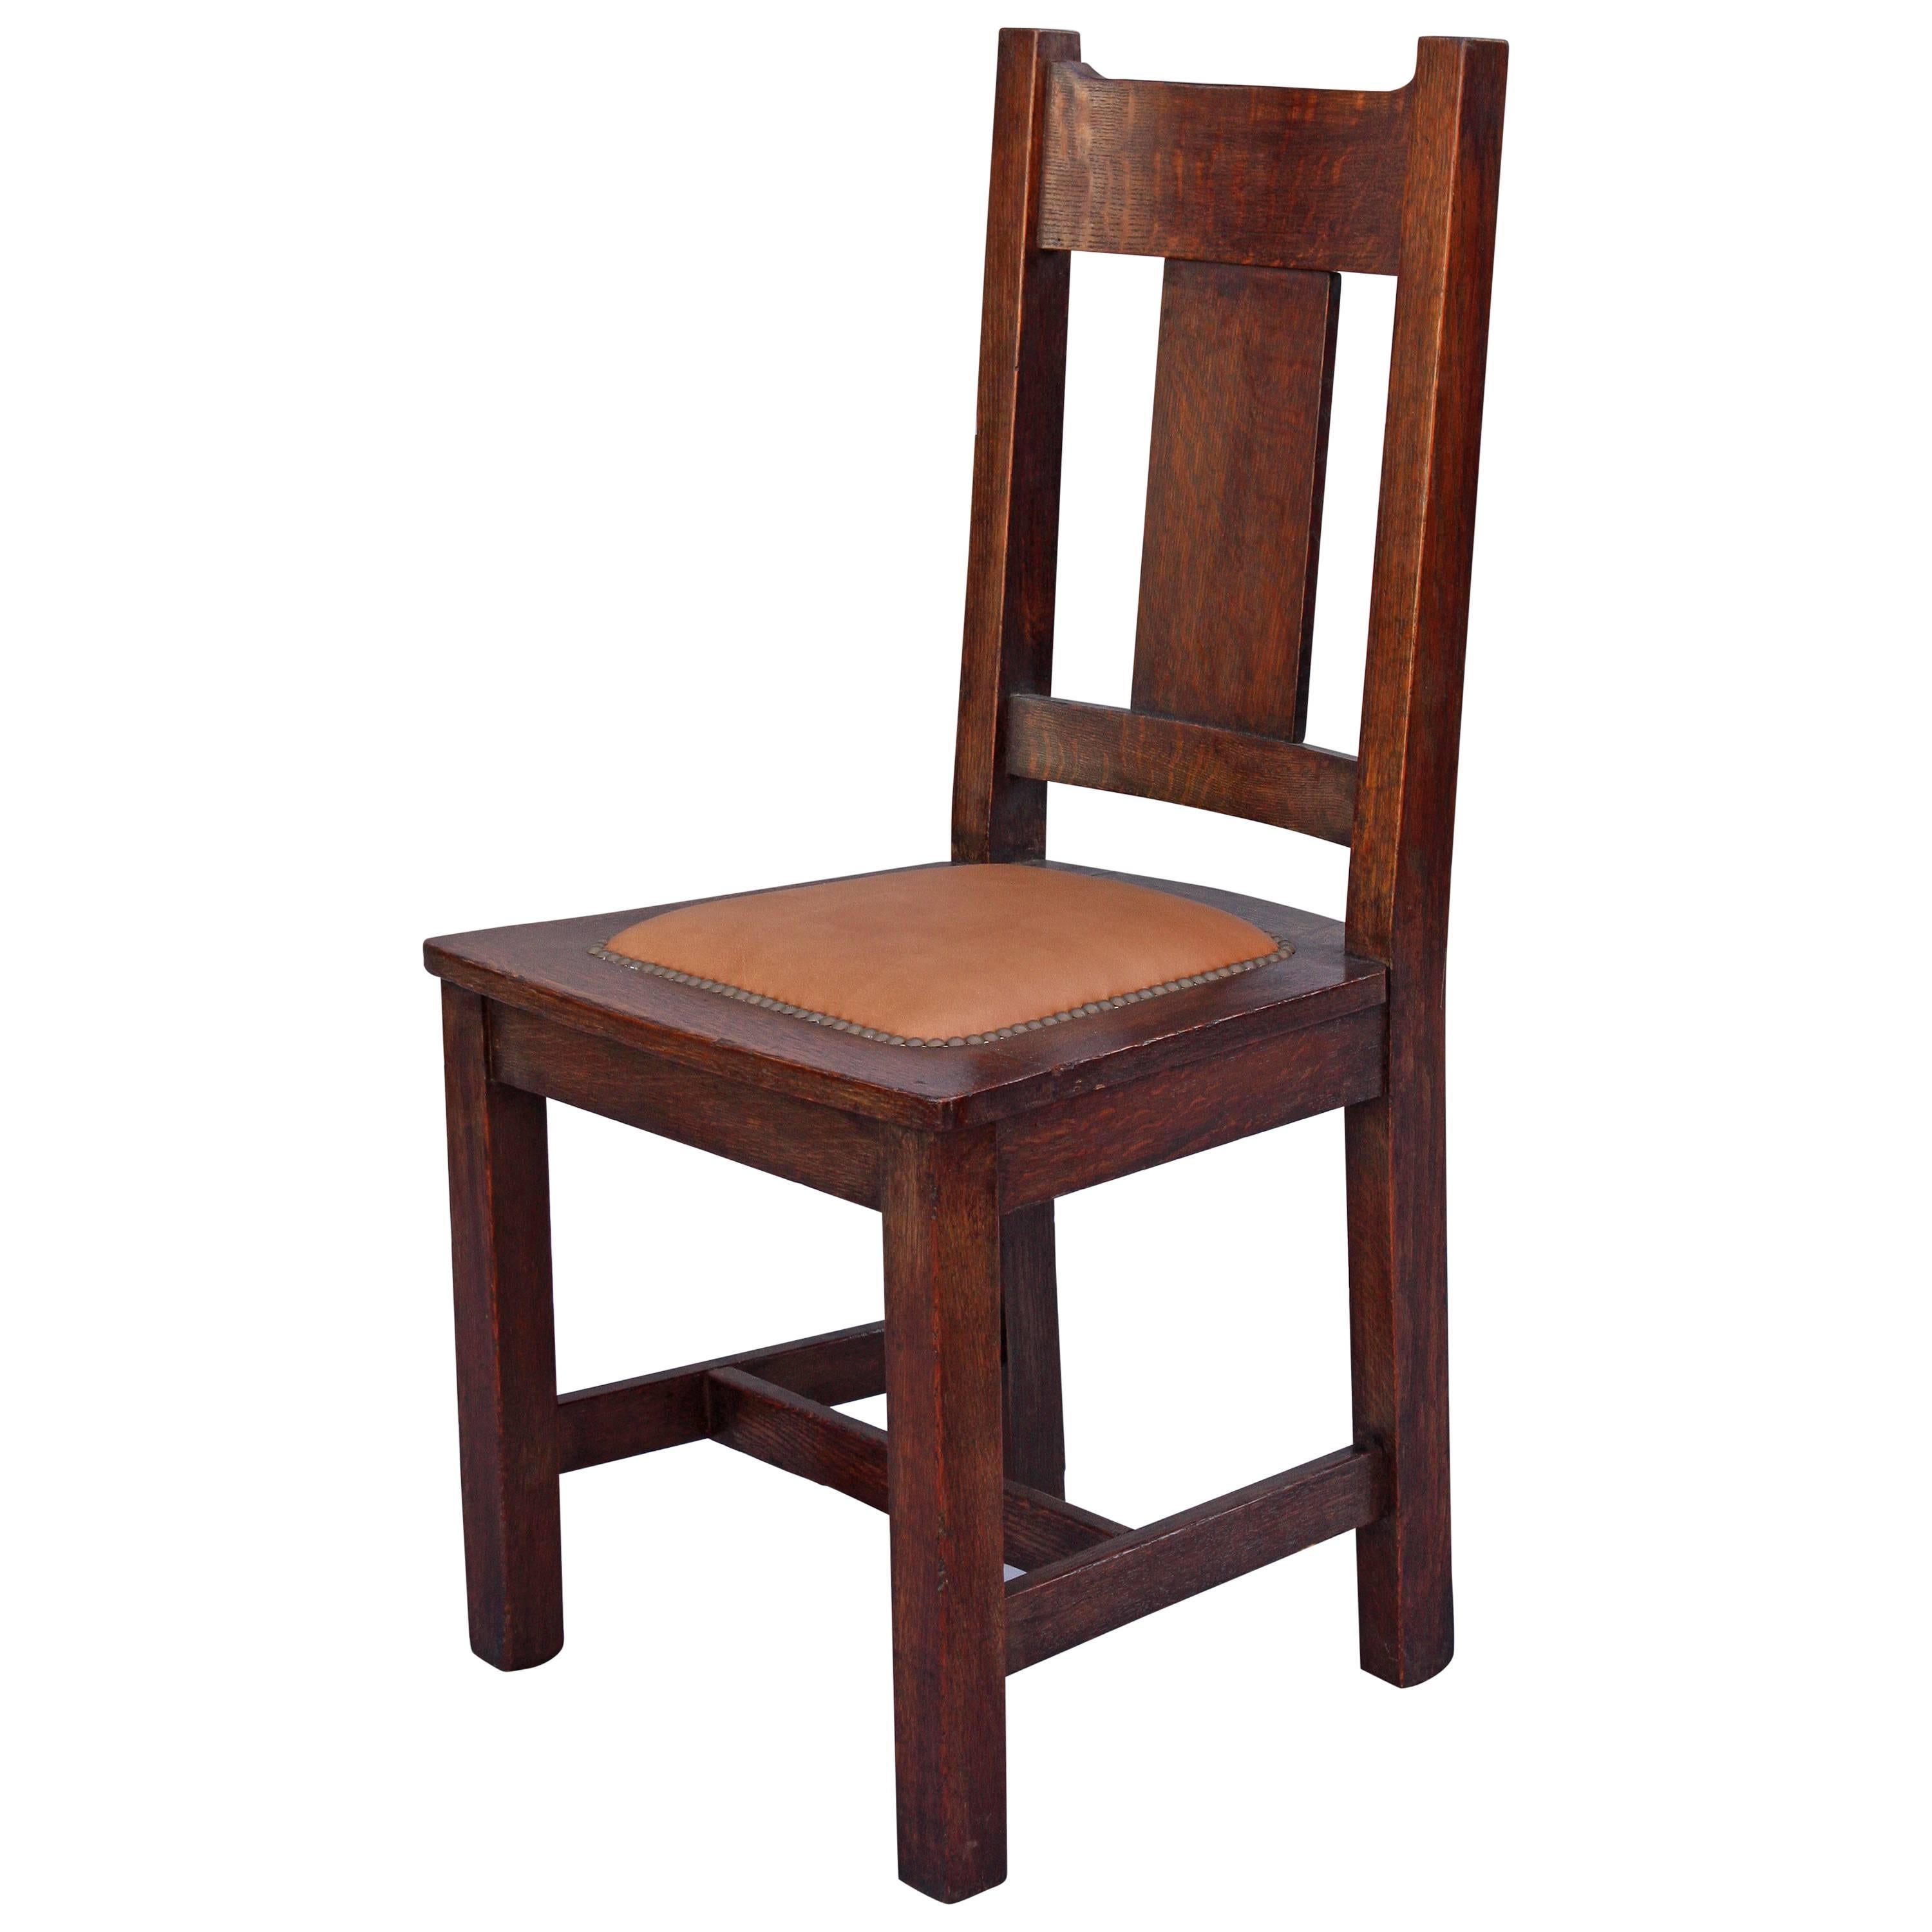 1910 Arts & Crafts Side Chair For Sale